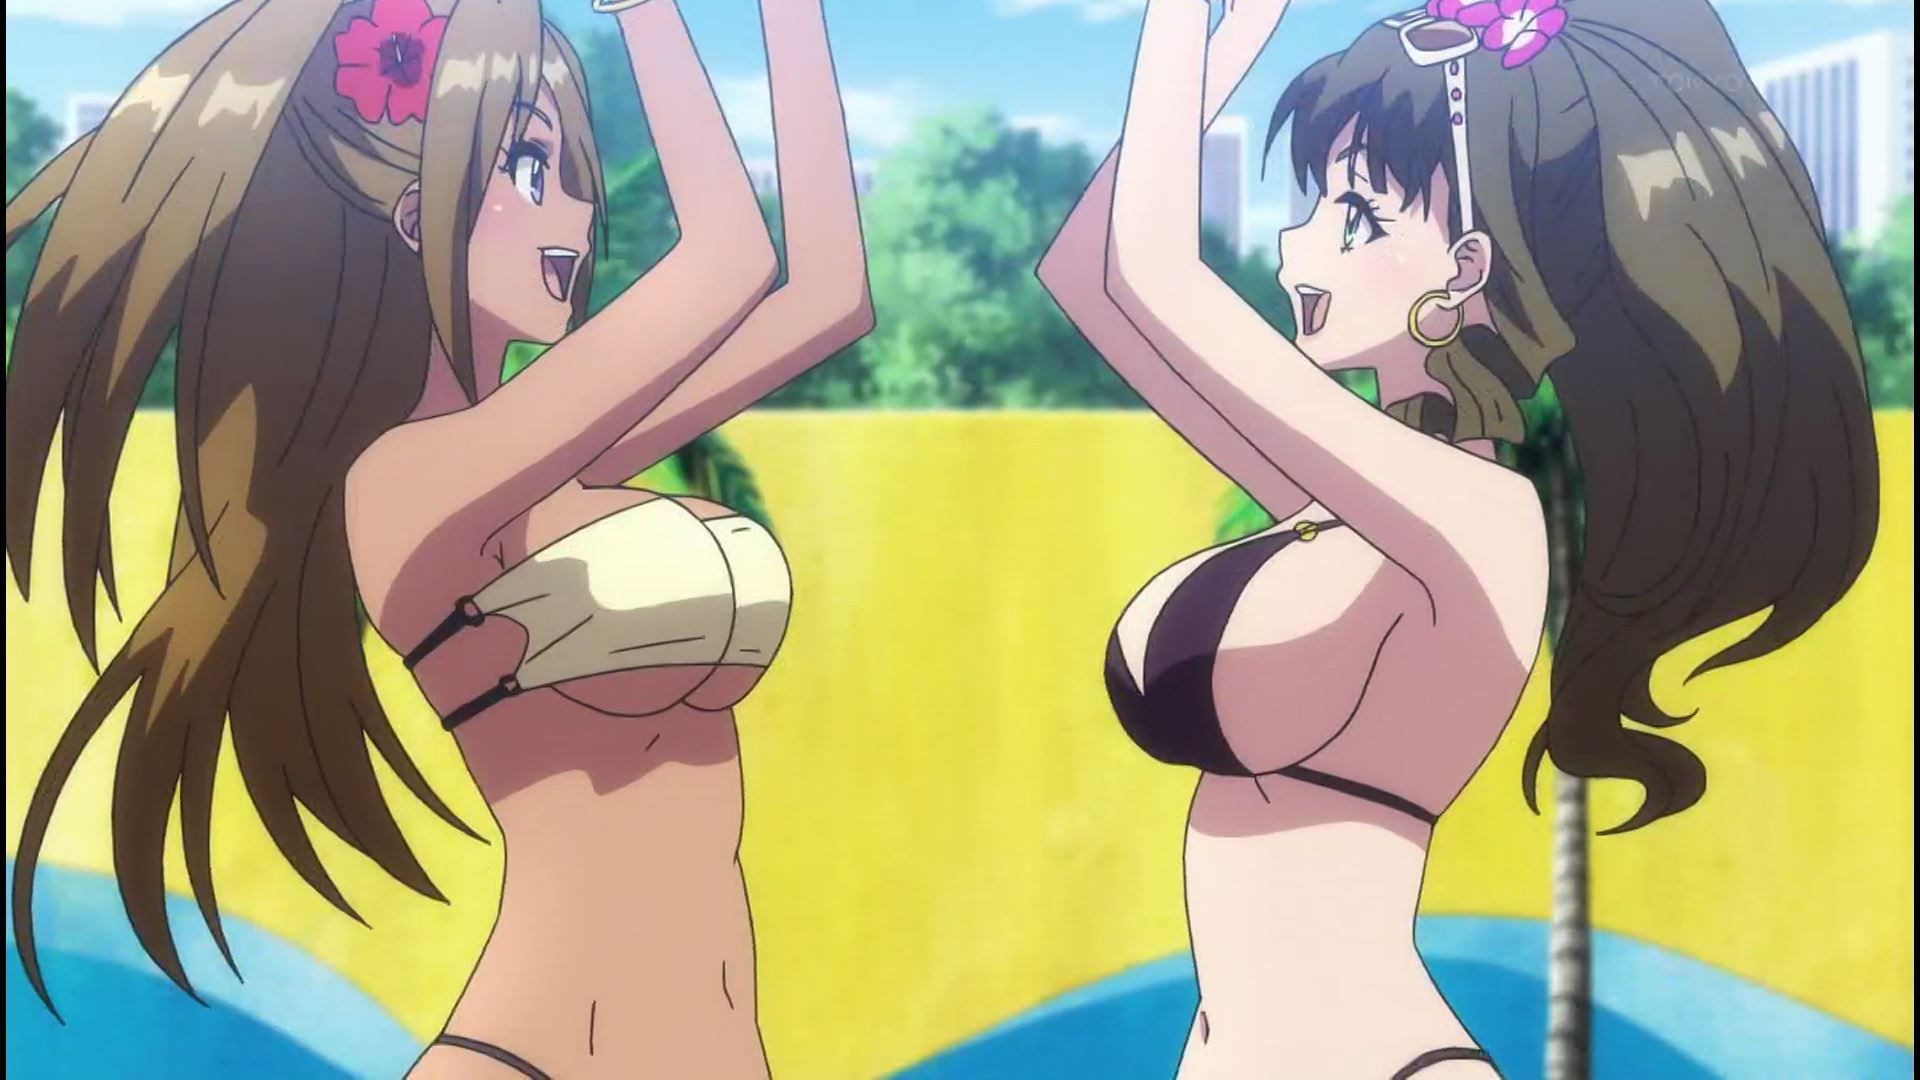 Anime [Kandagawa JETGIRLS] 6 episodes, such as girls' very cute swimsuit and naked! 10